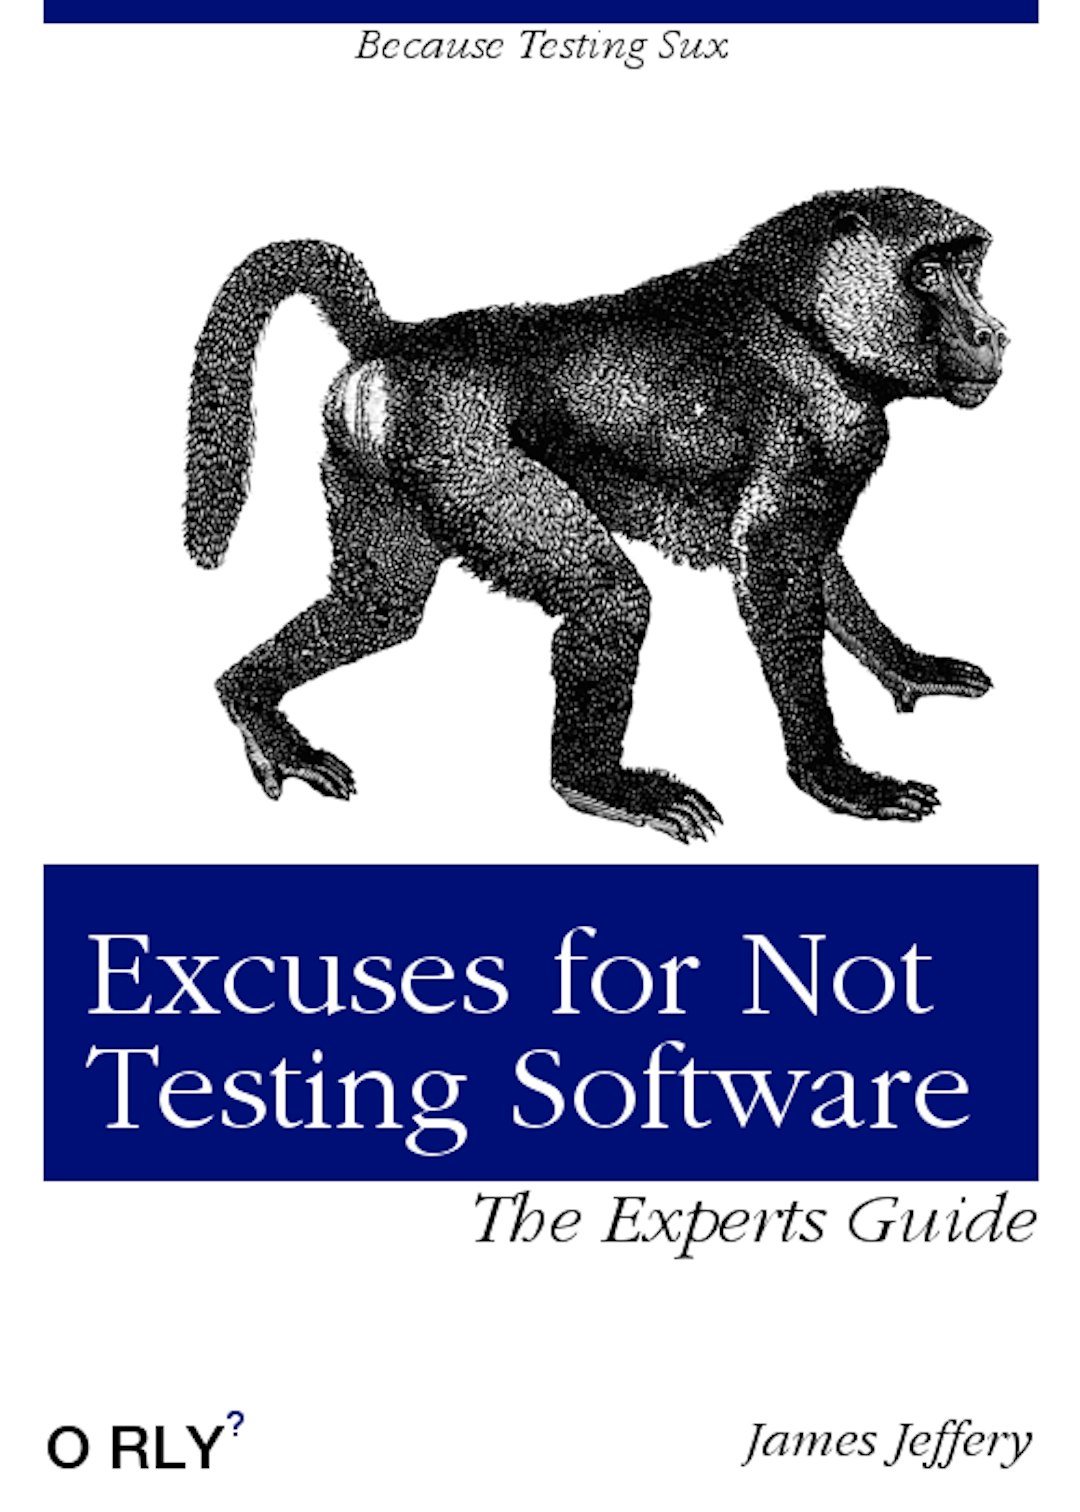 featured image - Common Excuses Why Developers Don’t Test Their Software